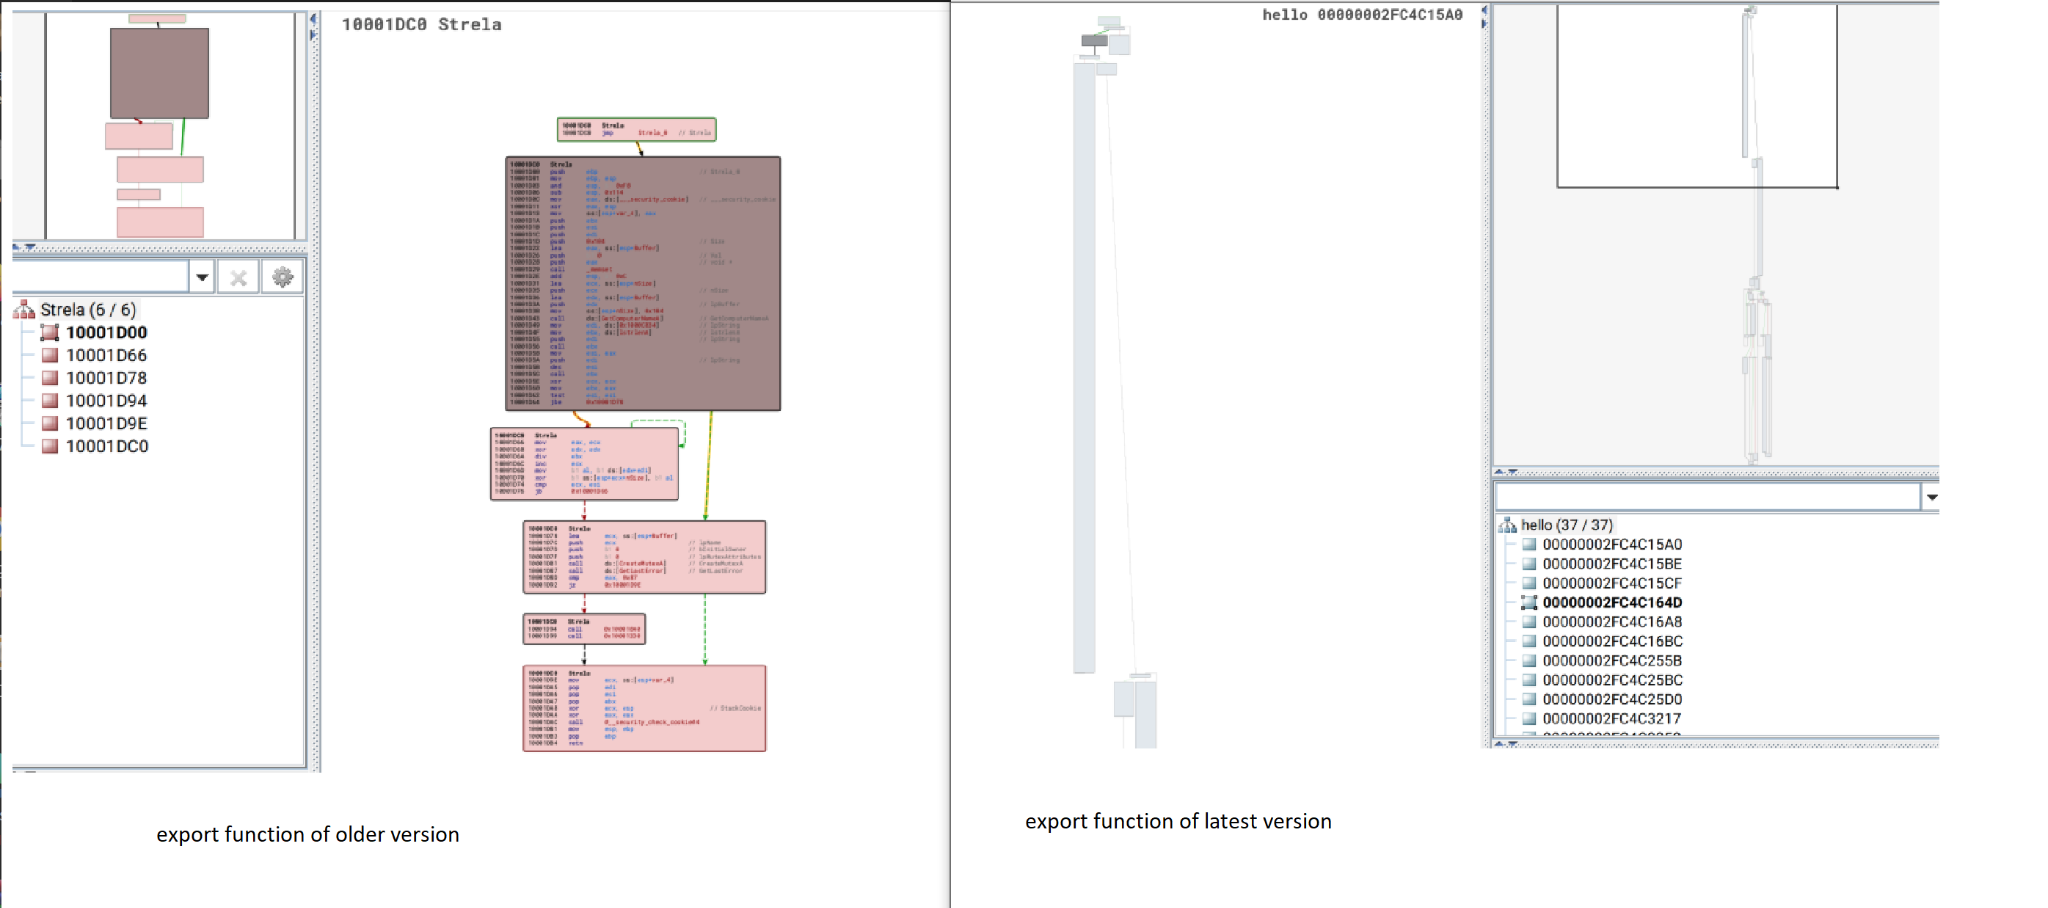 Figure 8 is two screenshots side-by-side comparing the export functions of the two different versions of StrelaStealer. On the left is the old version. On the right is the new version.